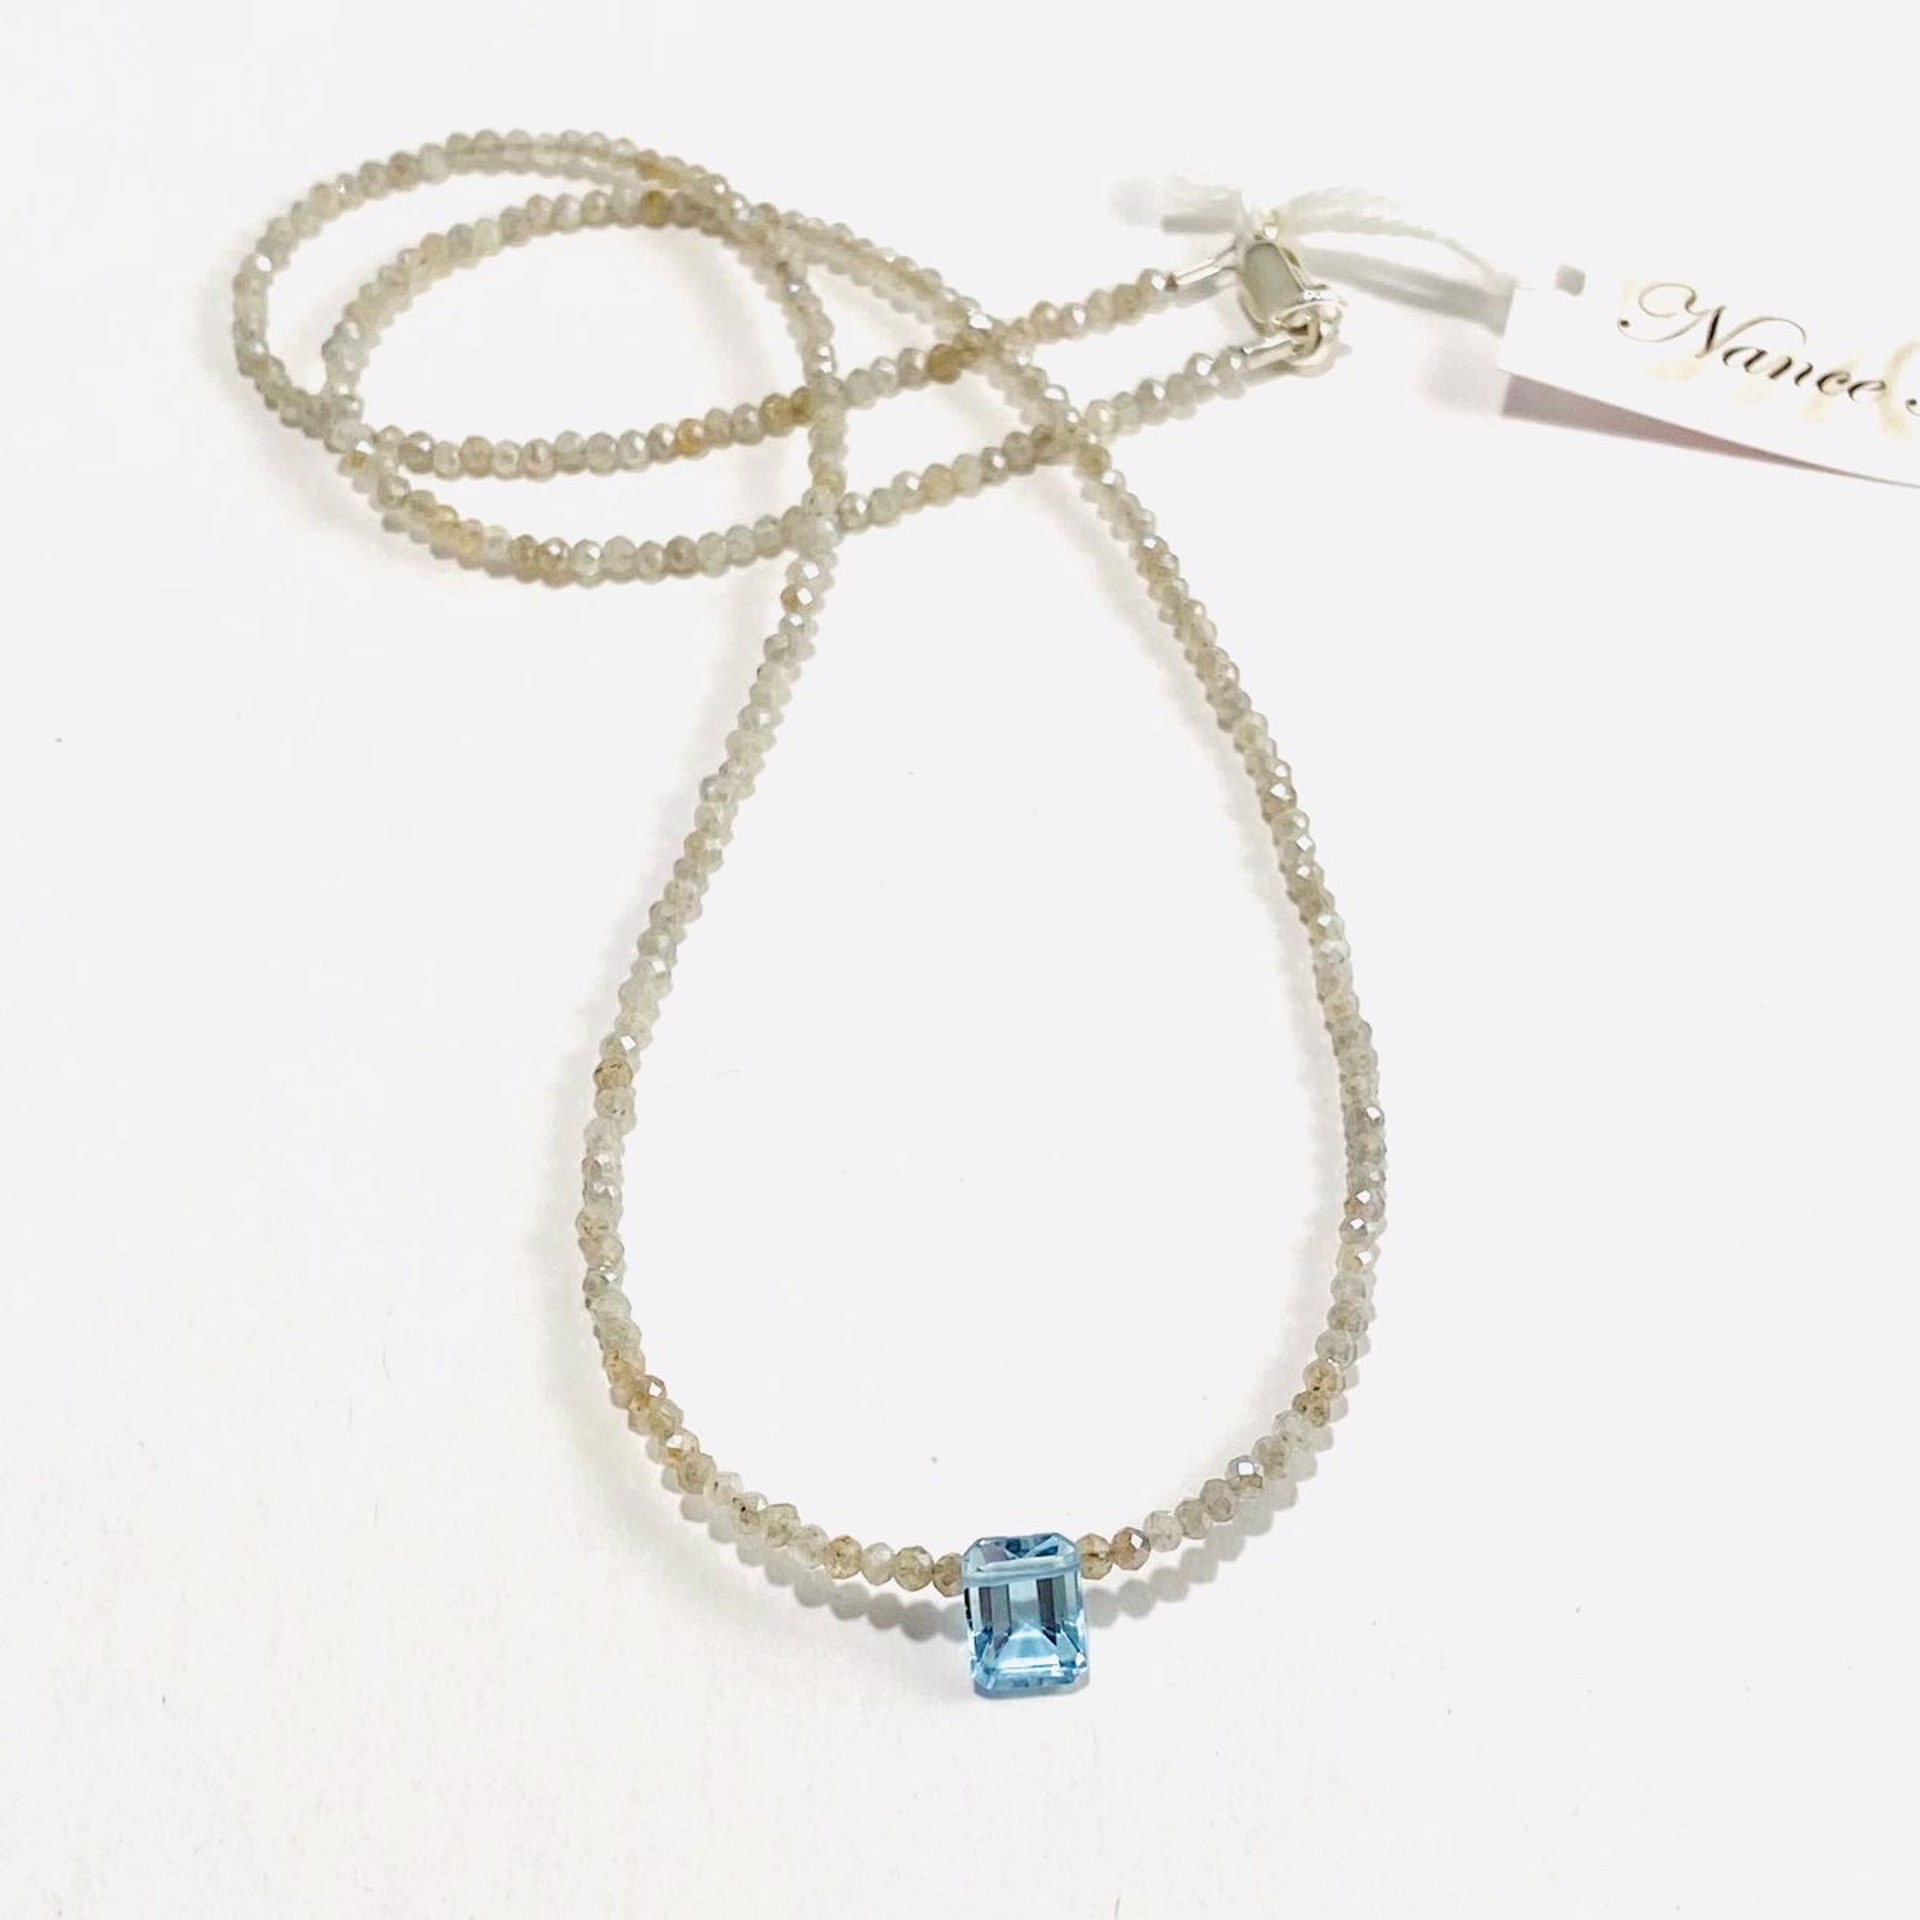 NT22-211  Tiny Faceted Labradorite Emerald Cut Blue Topaz  Necklace by Nance Trueworthy